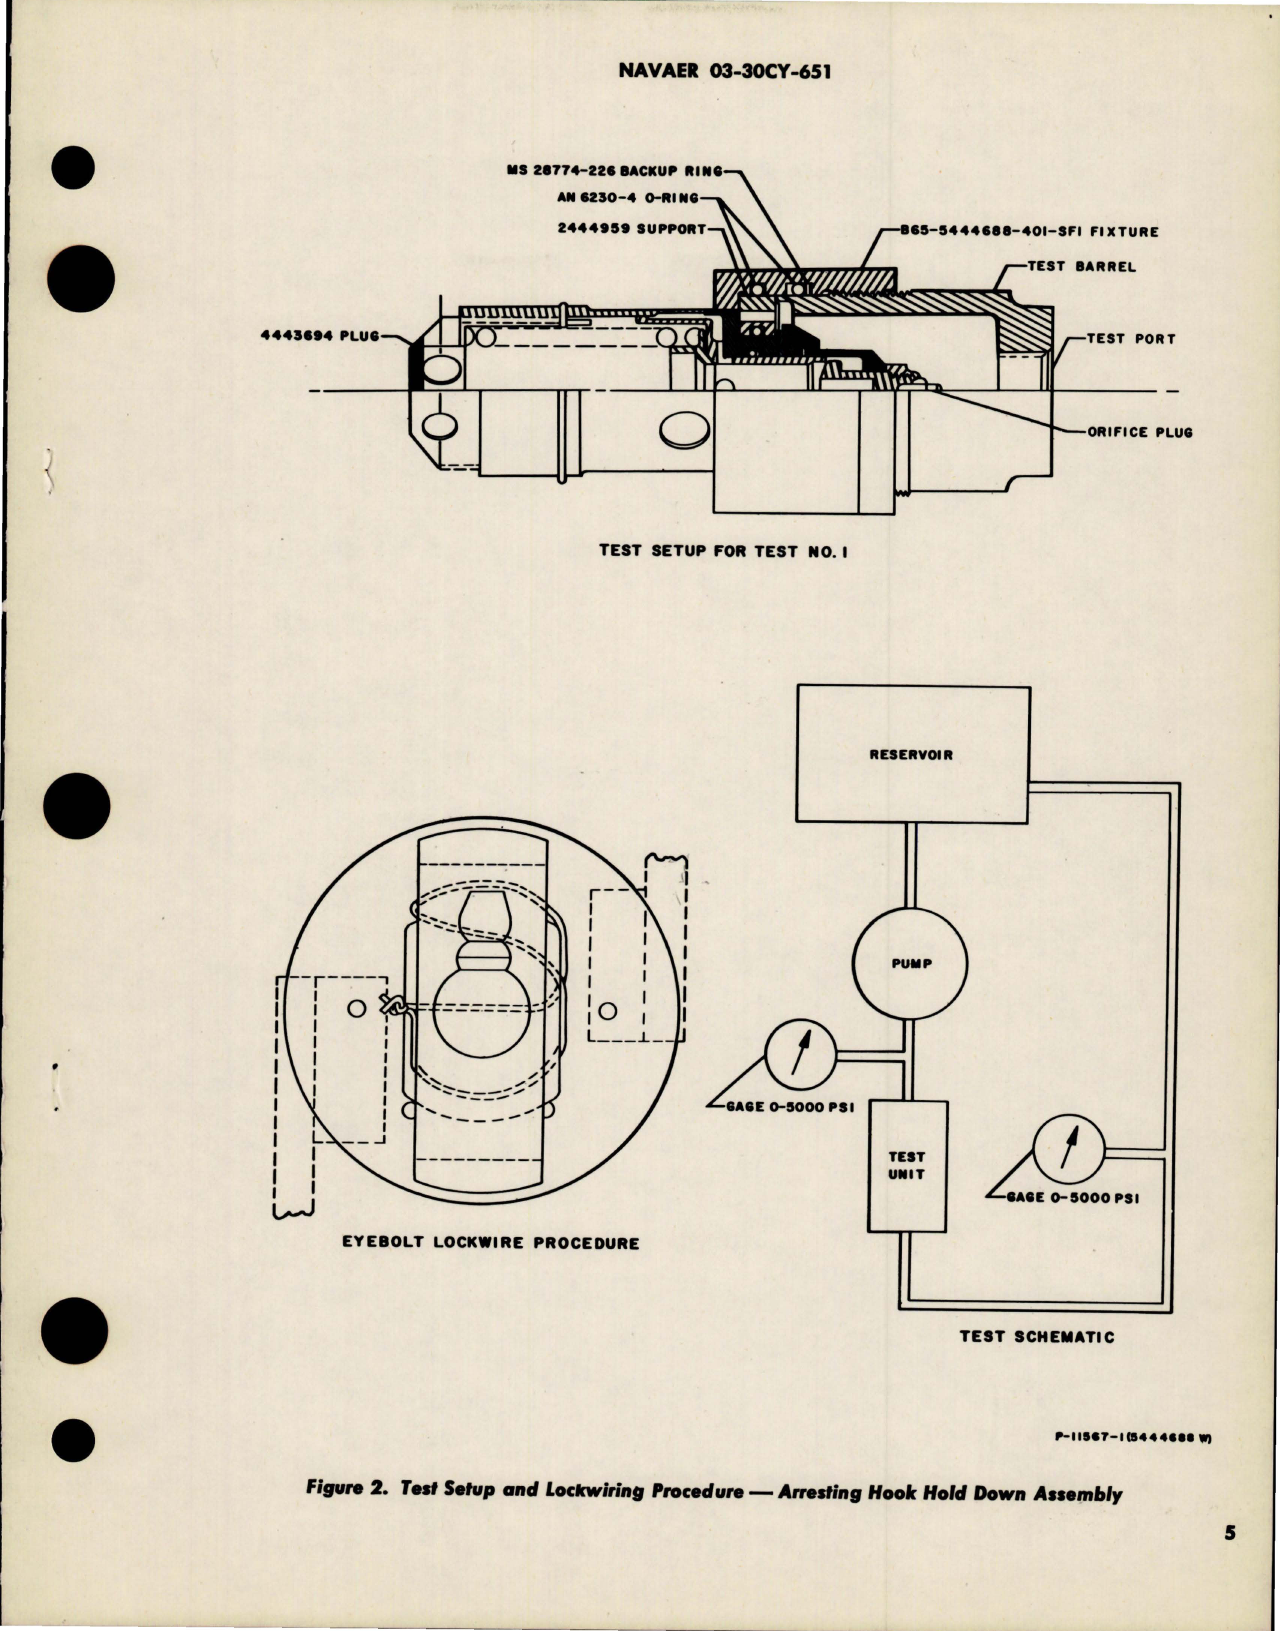 Sample page 5 from AirCorps Library document: Overhaul Instructions with Parts for Arresting Hook Hold Down Assembly